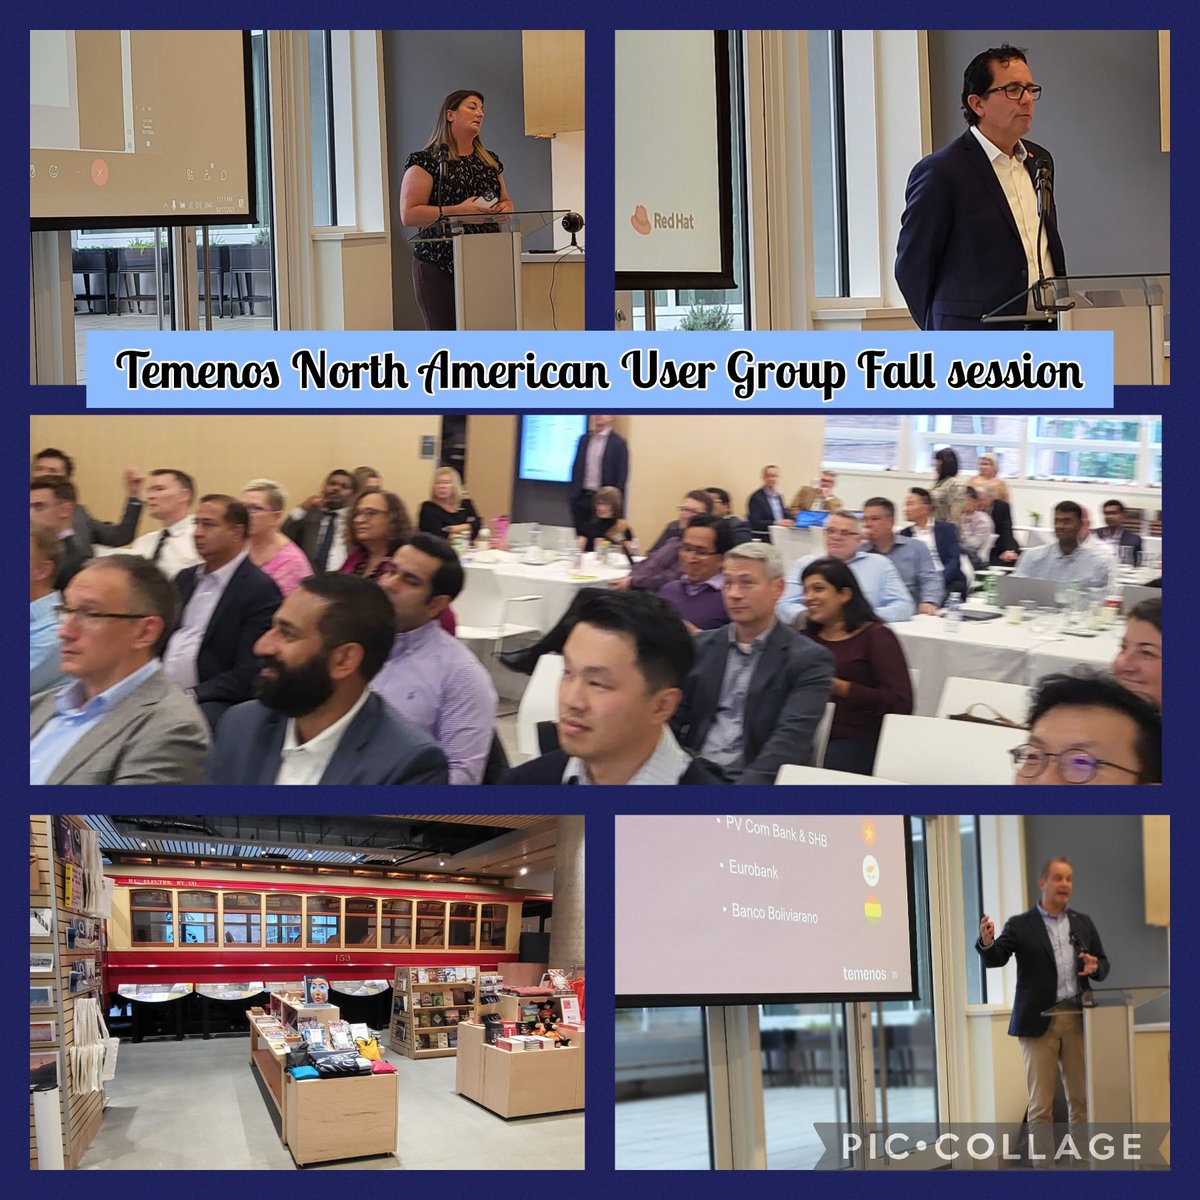 Wrapping up 2 days of presentations, discussions & collaborations from #Digital to #Core_Banking to #AI #Temeno_North_American_User_Group with #Peers&Partners. @BlueShoreNews @Temenos @OneAston_ @Uniken_Inc @RedHat @HPE @ClearSight_BI #BlueShoreTech #bank #credit unions